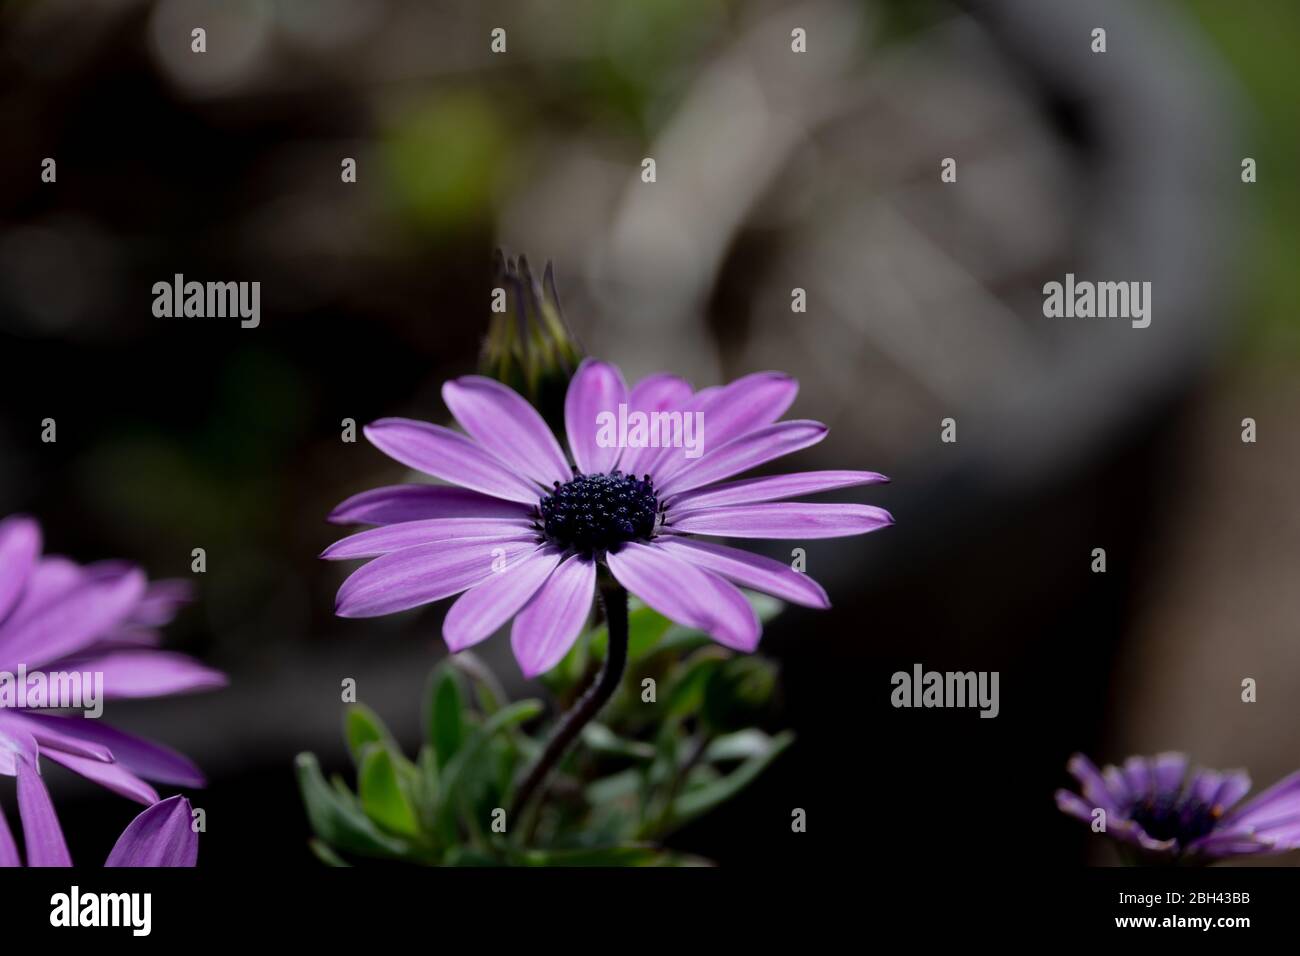 African daisy flower with a blurred background. This flower has purple petals and a deep purple stigma Stock Photo